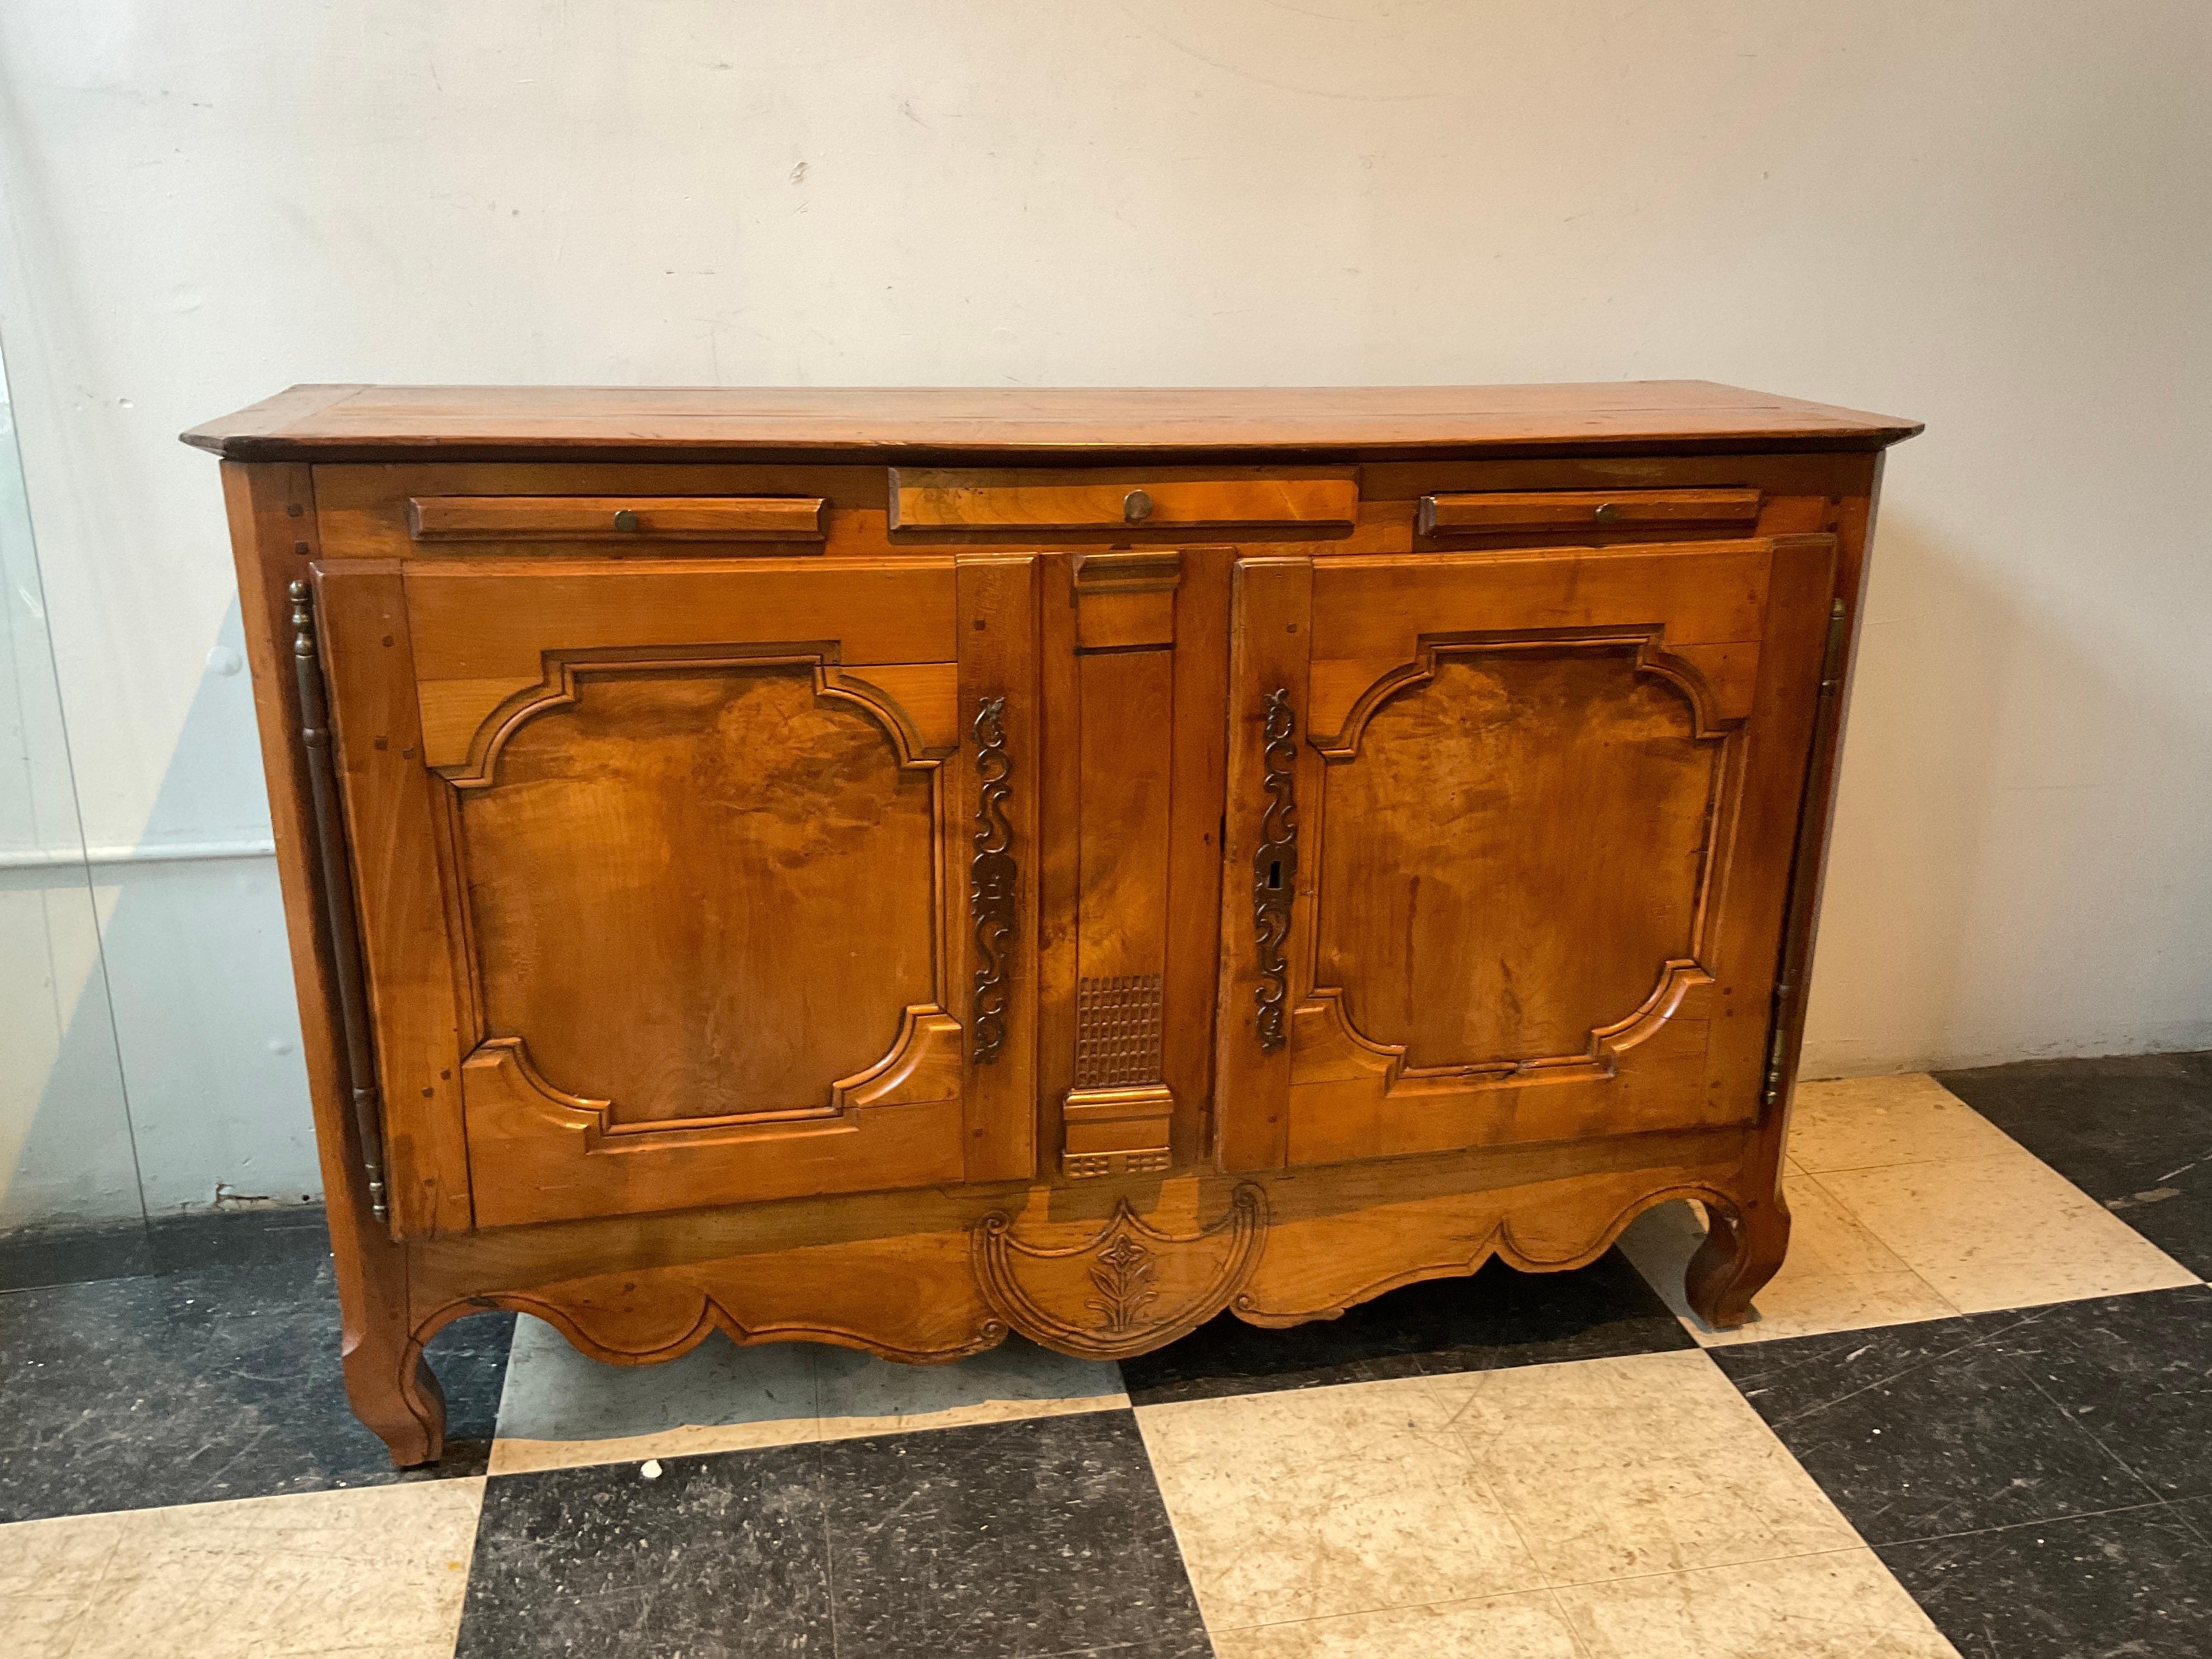 1850s French Provincial buffet. Inside lined with fabric.